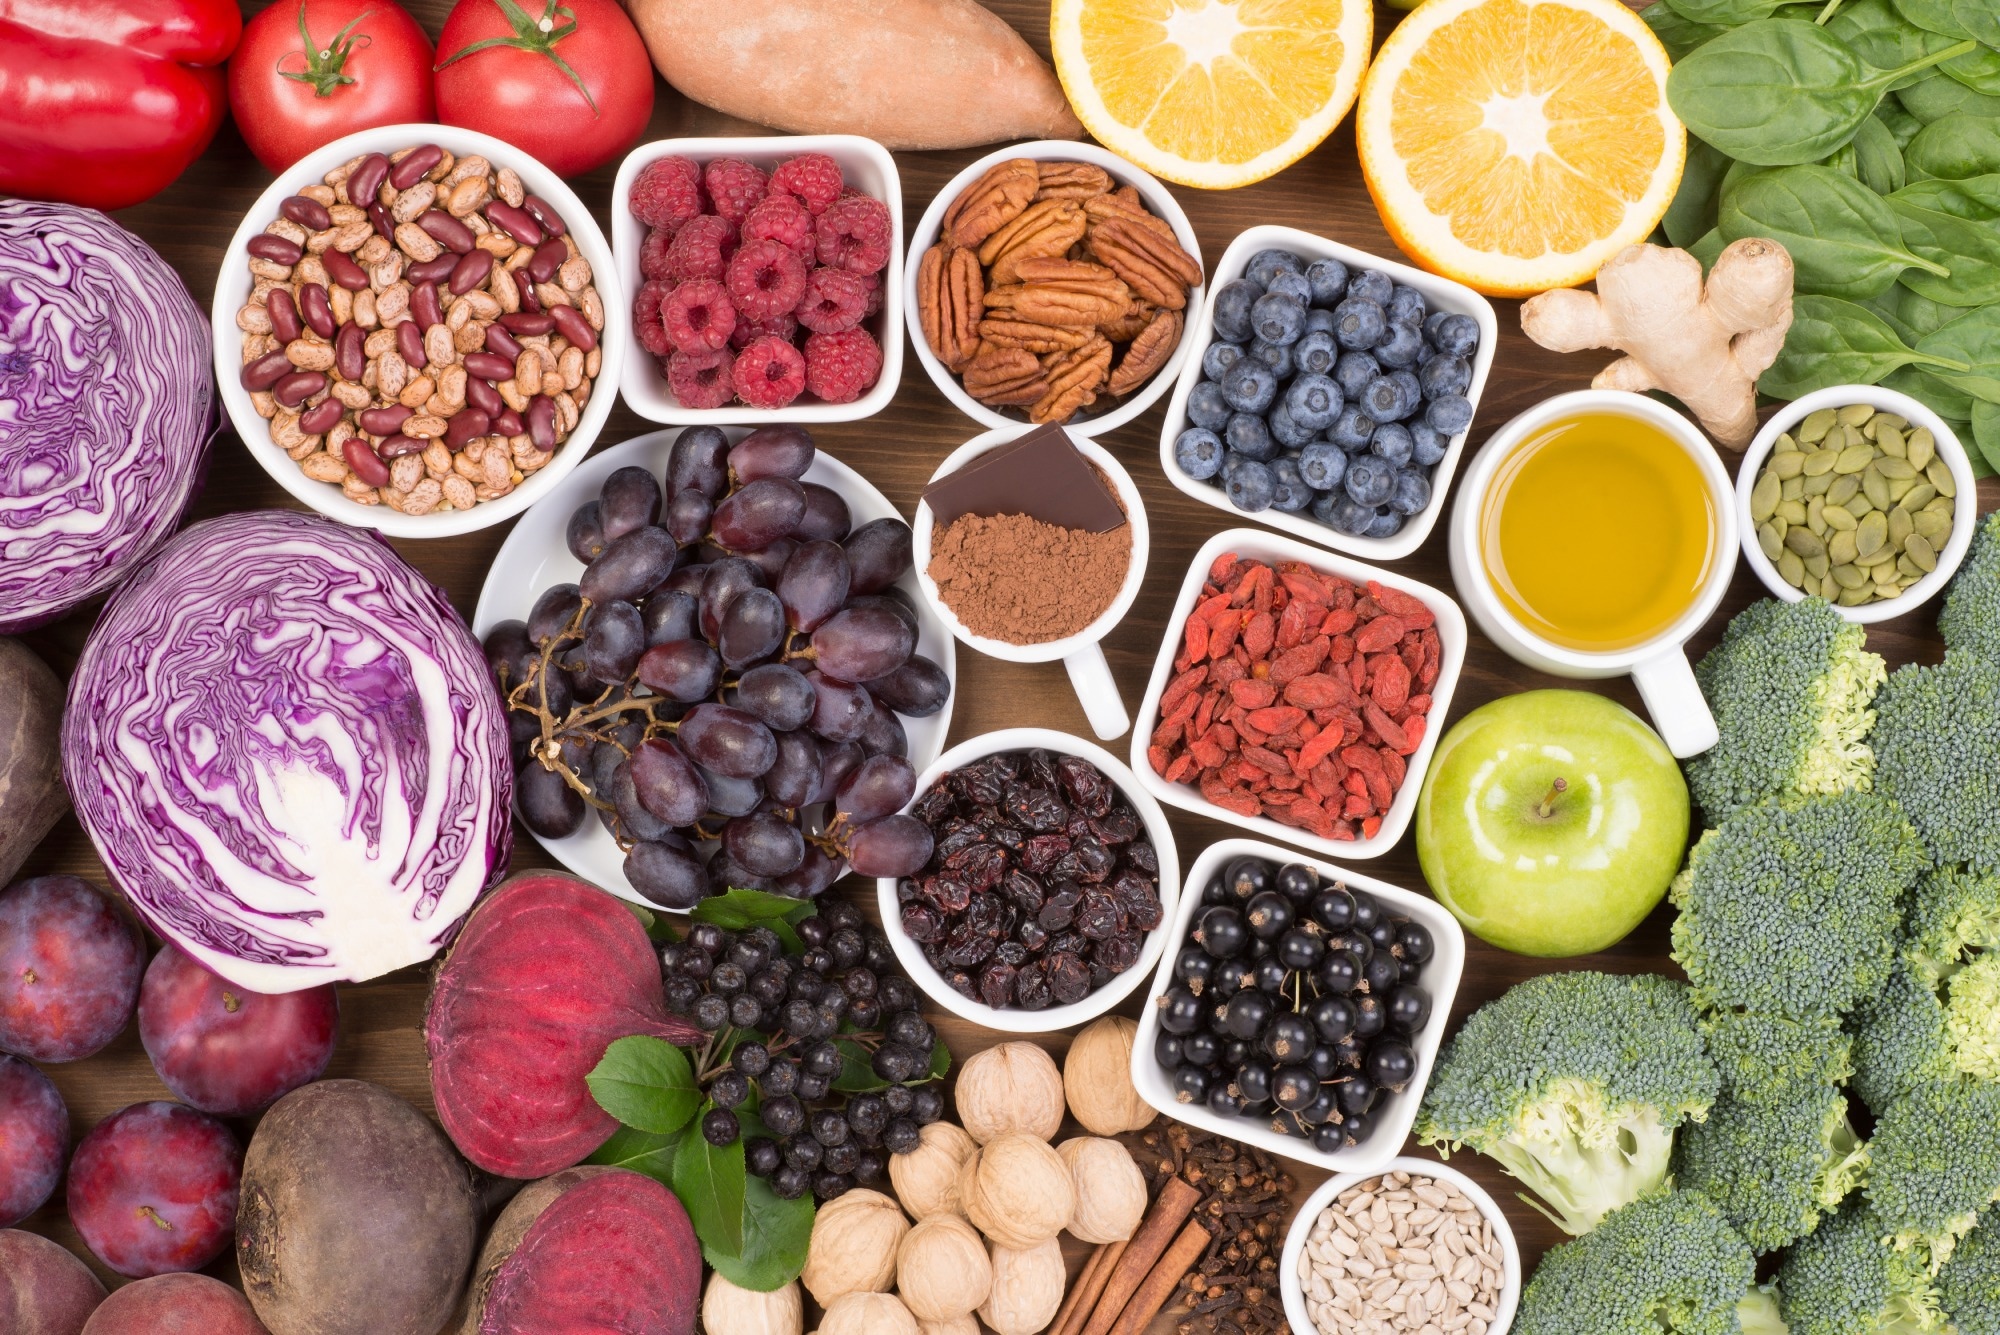 Study: The Role of Micronutrients in Neurological Disorders. Image Credit: photka/Shutterstock.com